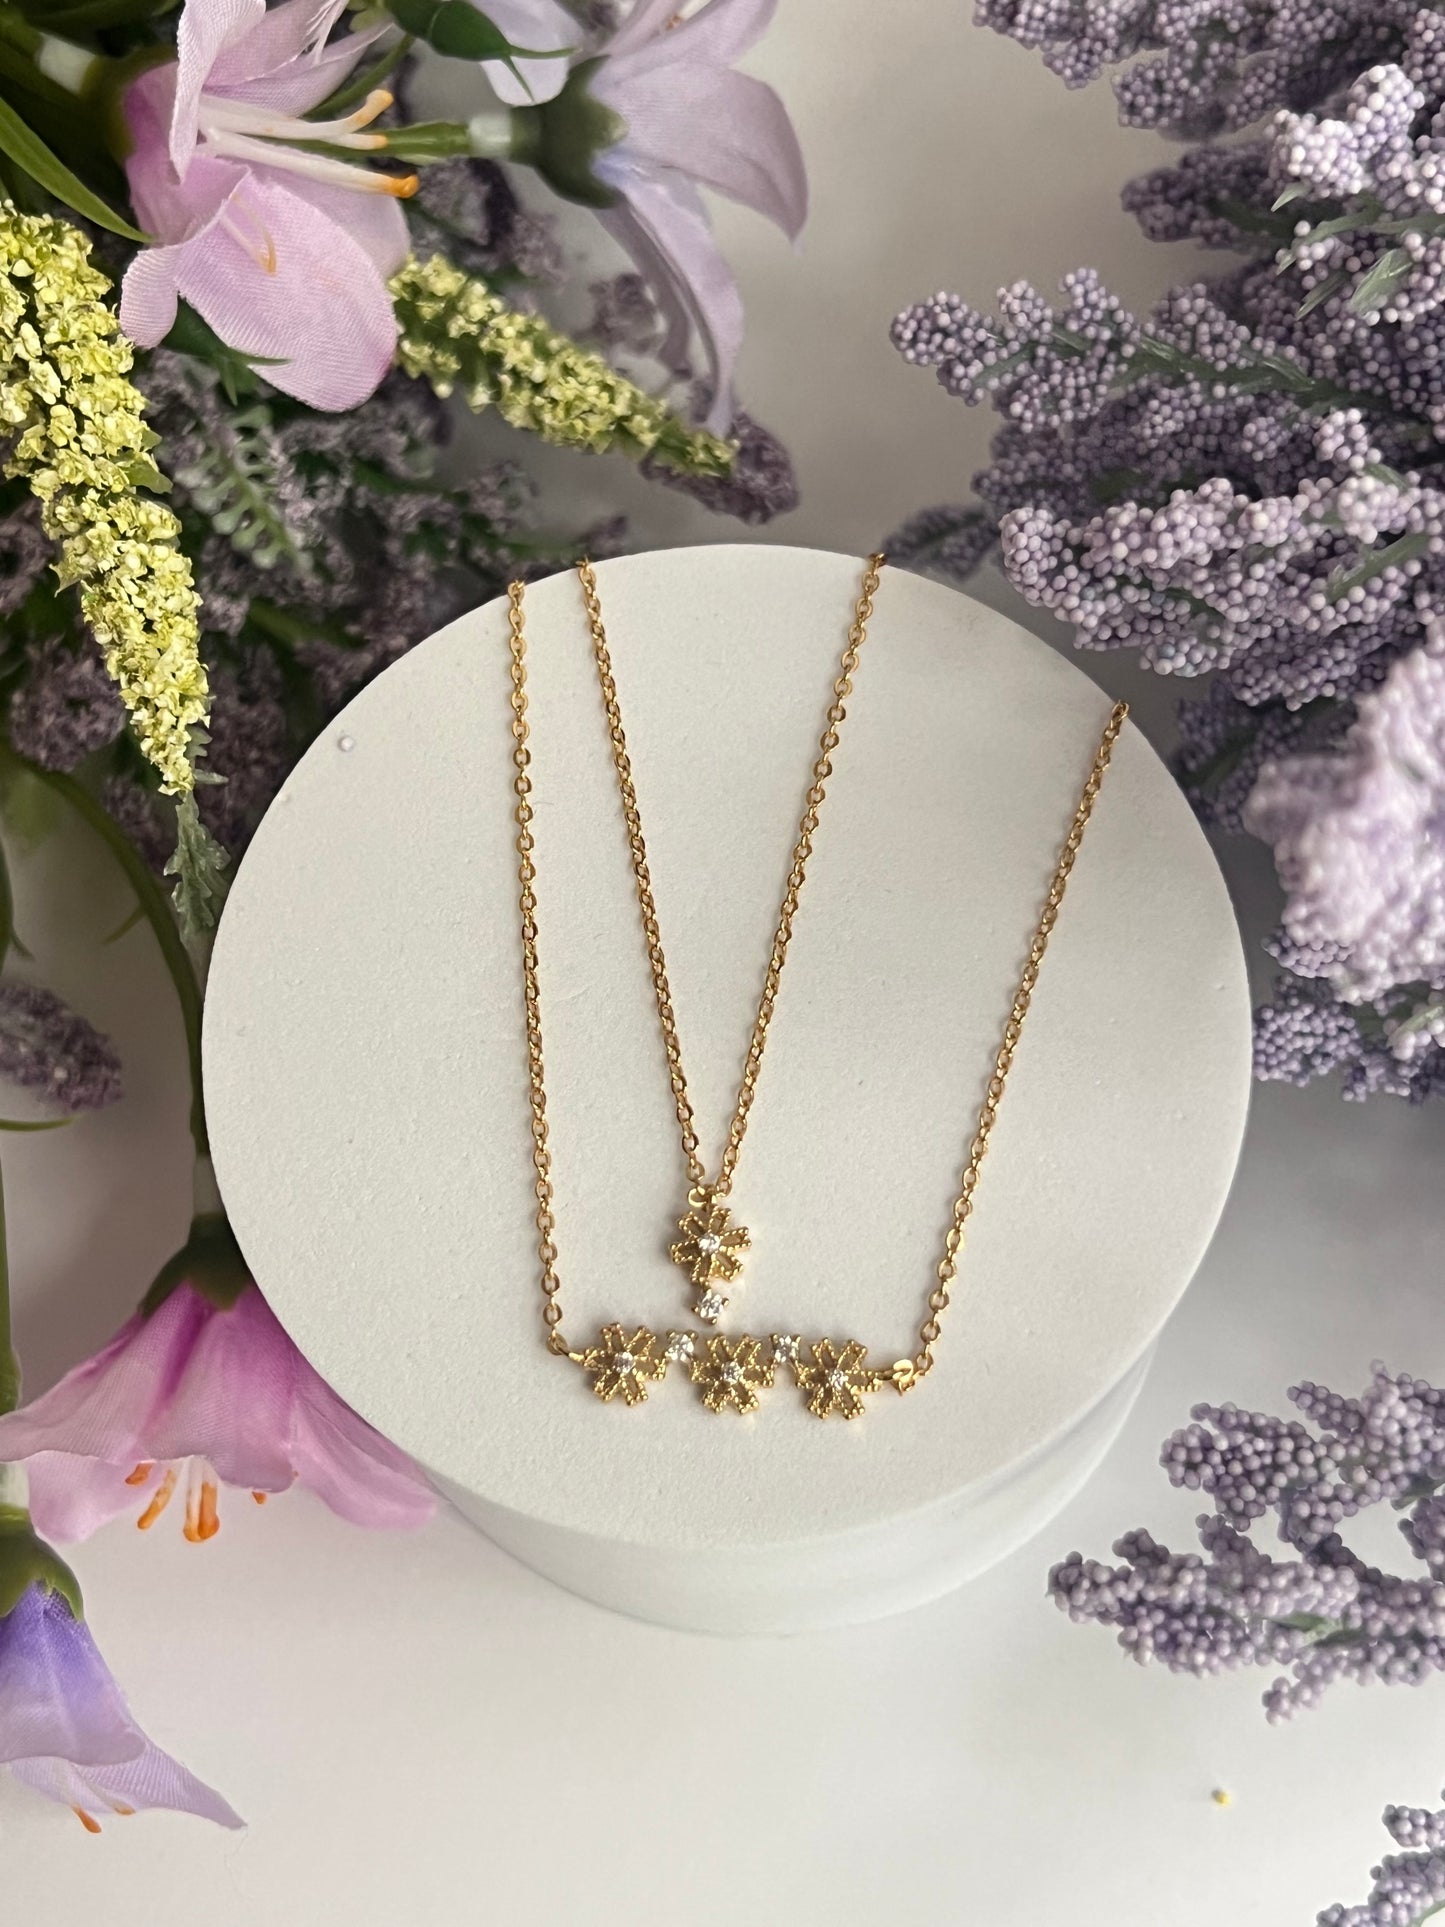 Spring Dainty Necklace